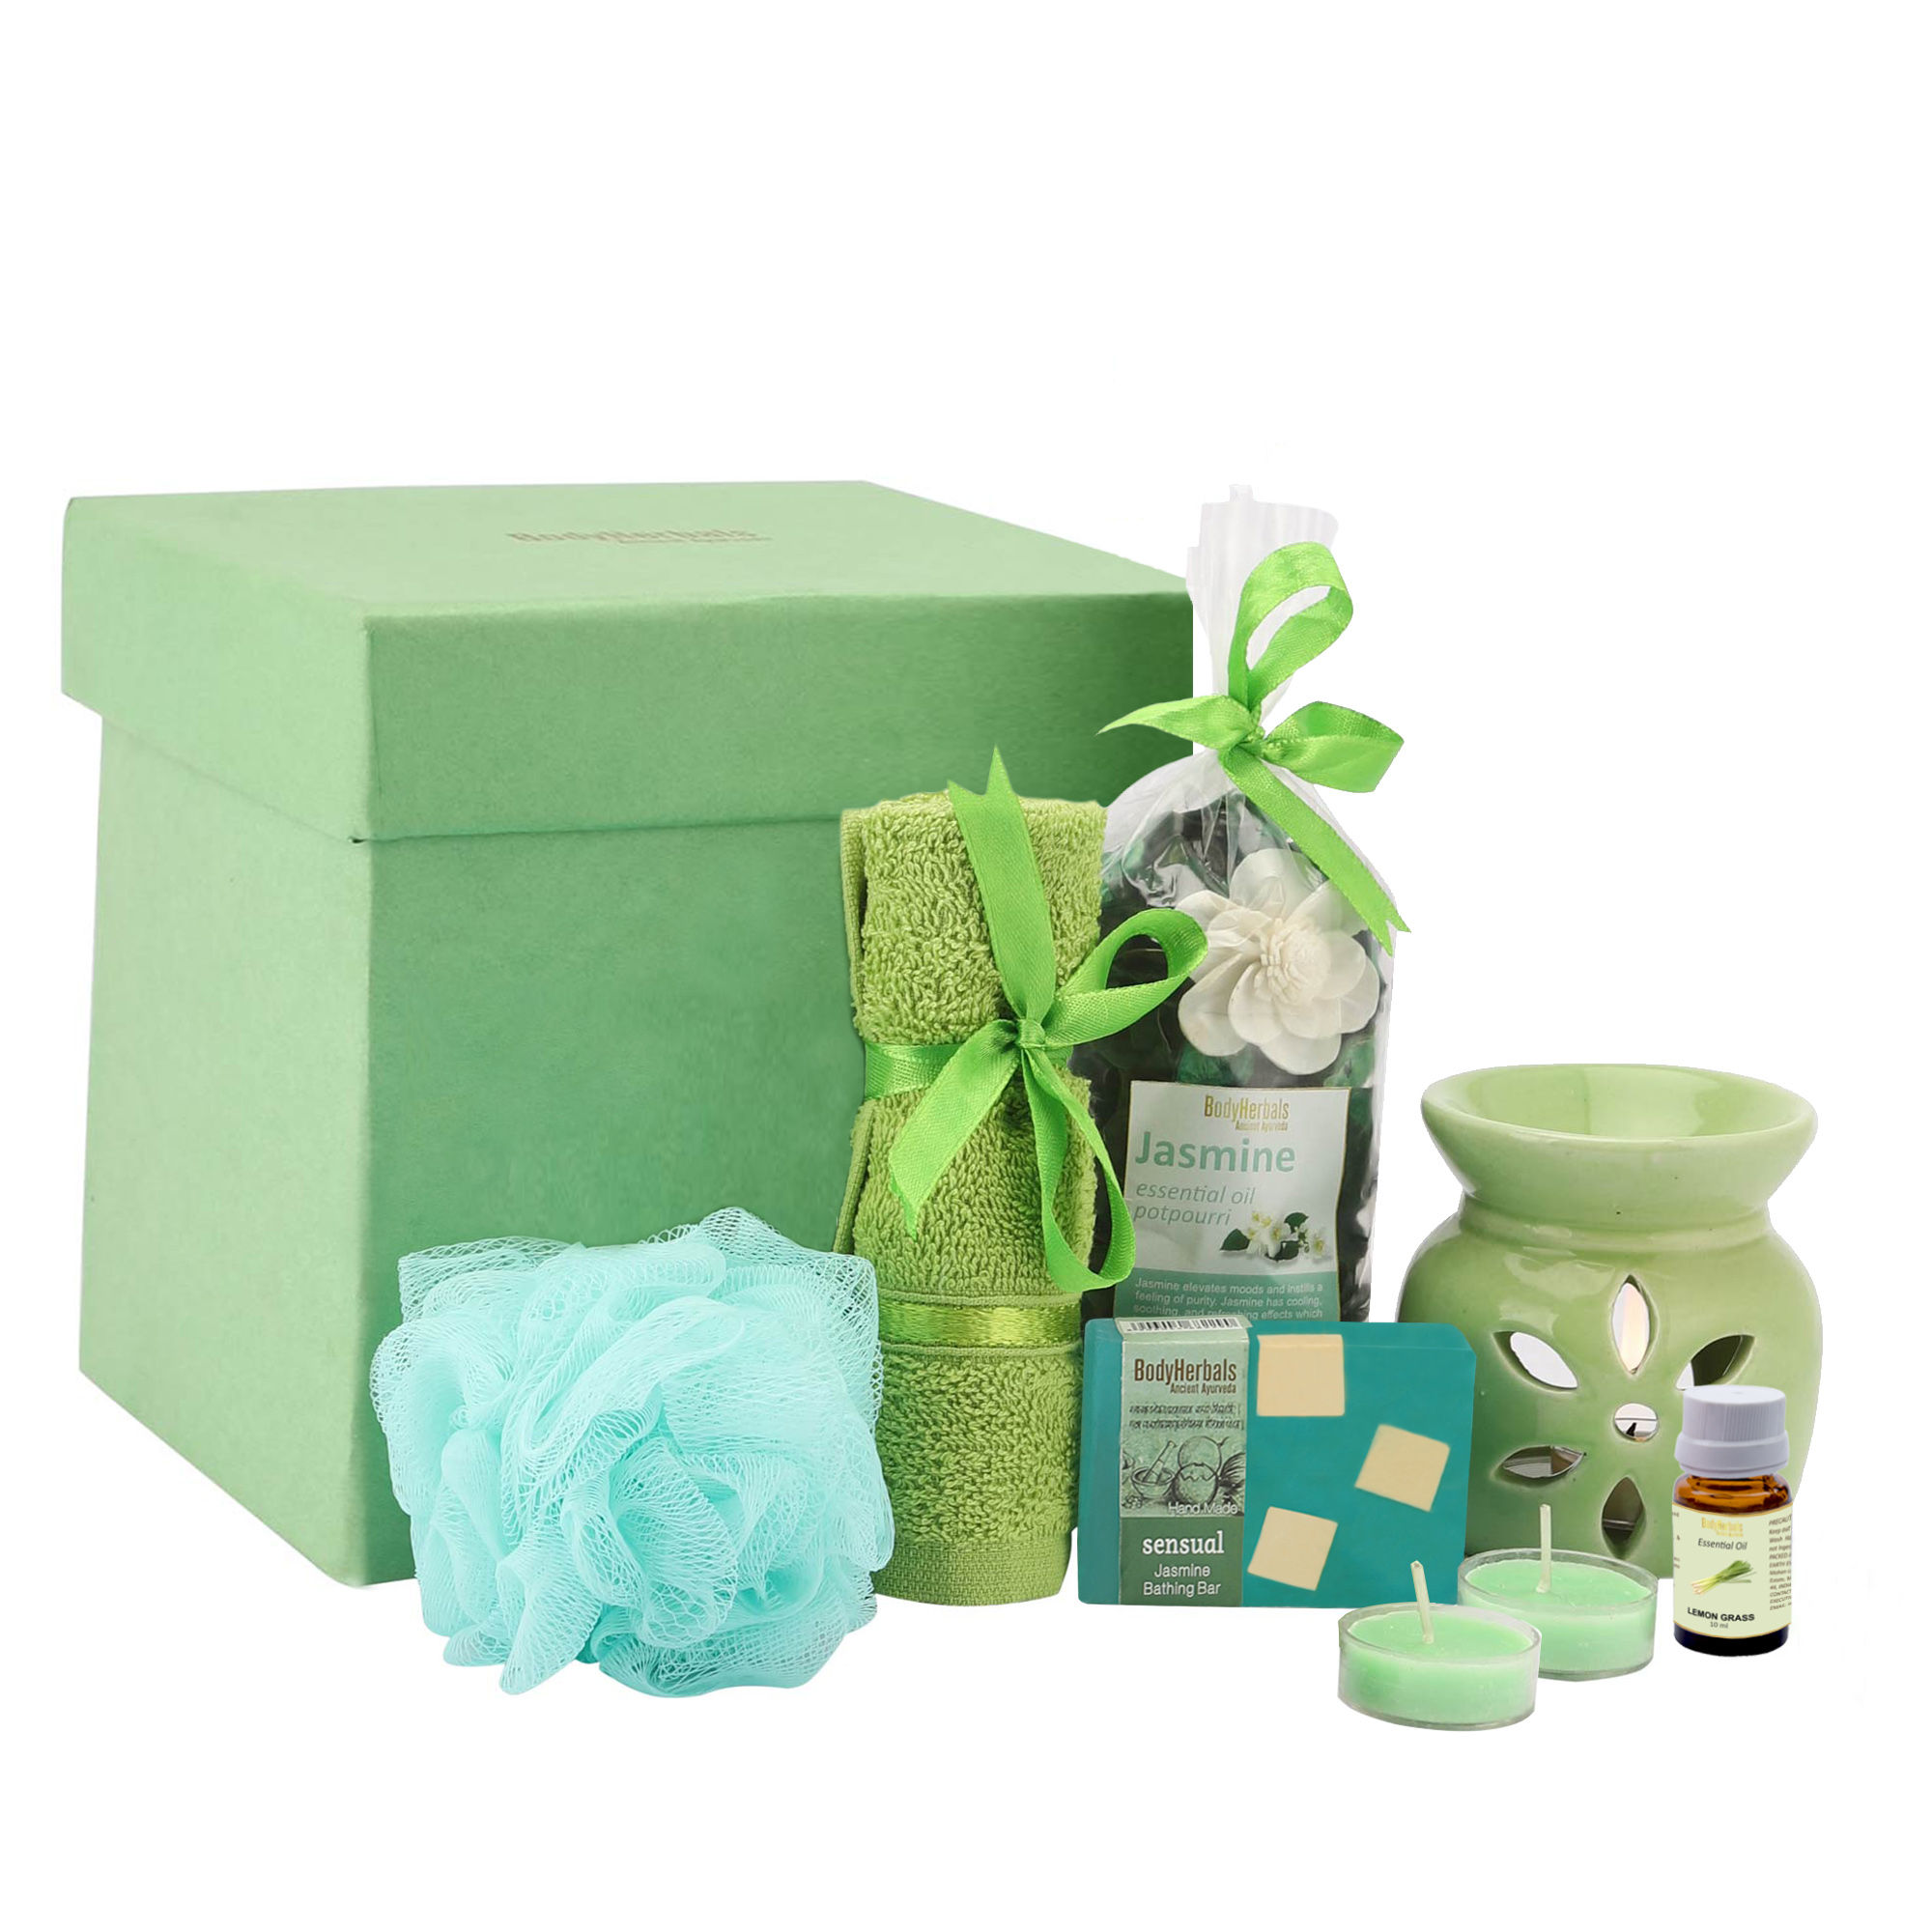 BodyHerbals Jasmine Soap Spa Set Gift Box - Gift Sets & Combos for Women & Men